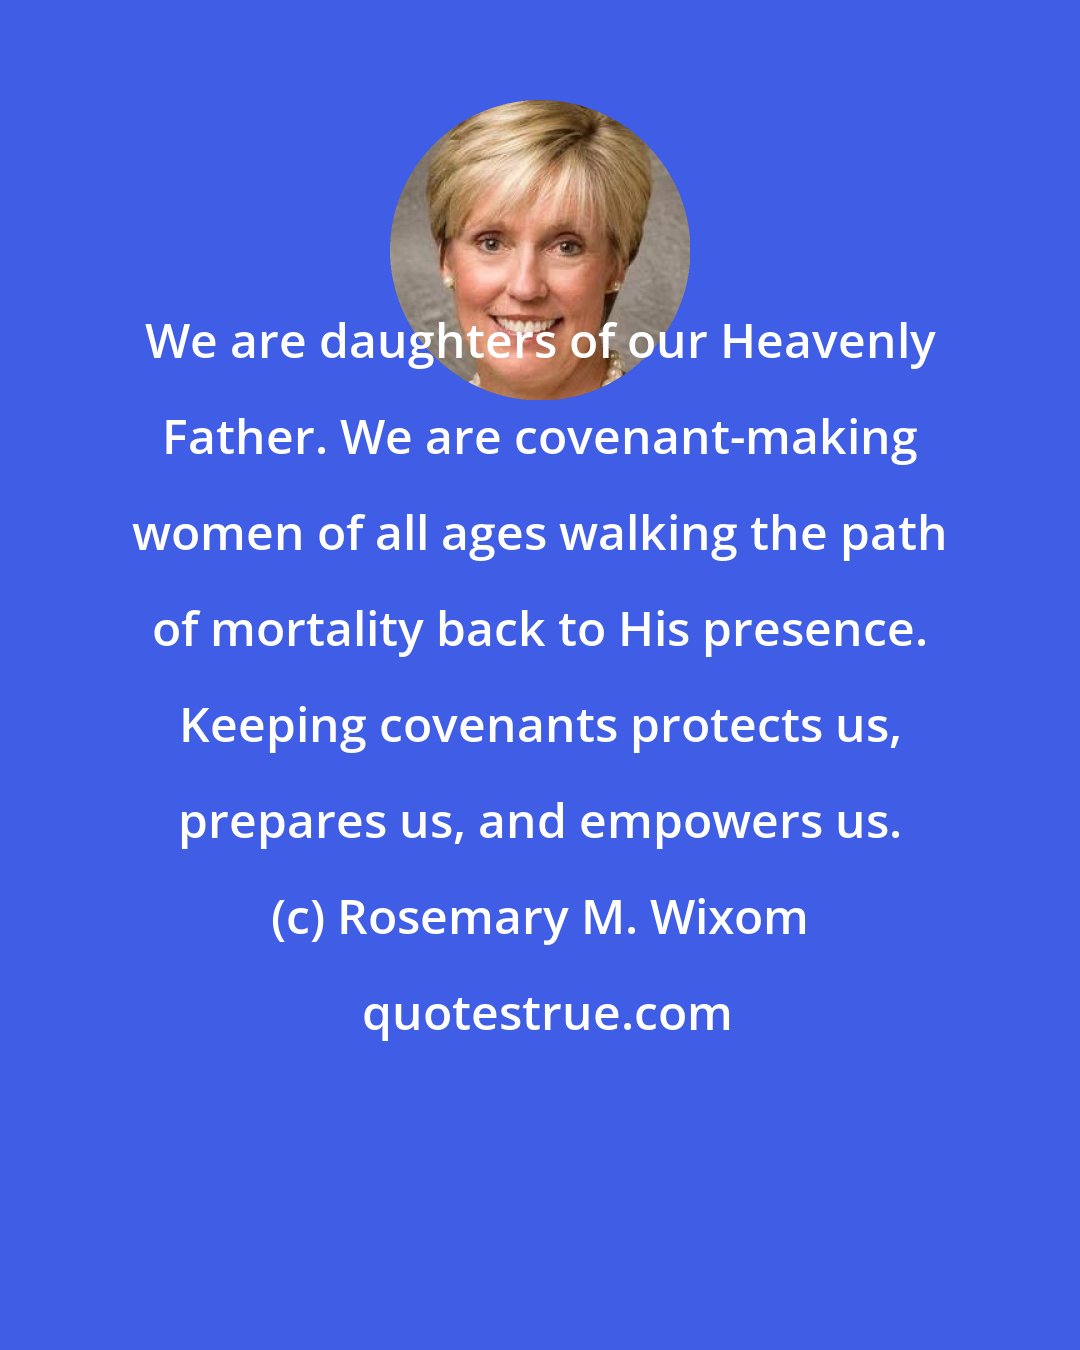 Rosemary M. Wixom: We are daughters of our Heavenly Father. We are covenant-making women of all ages walking the path of mortality back to His presence. Keeping covenants protects us, prepares us, and empowers us.